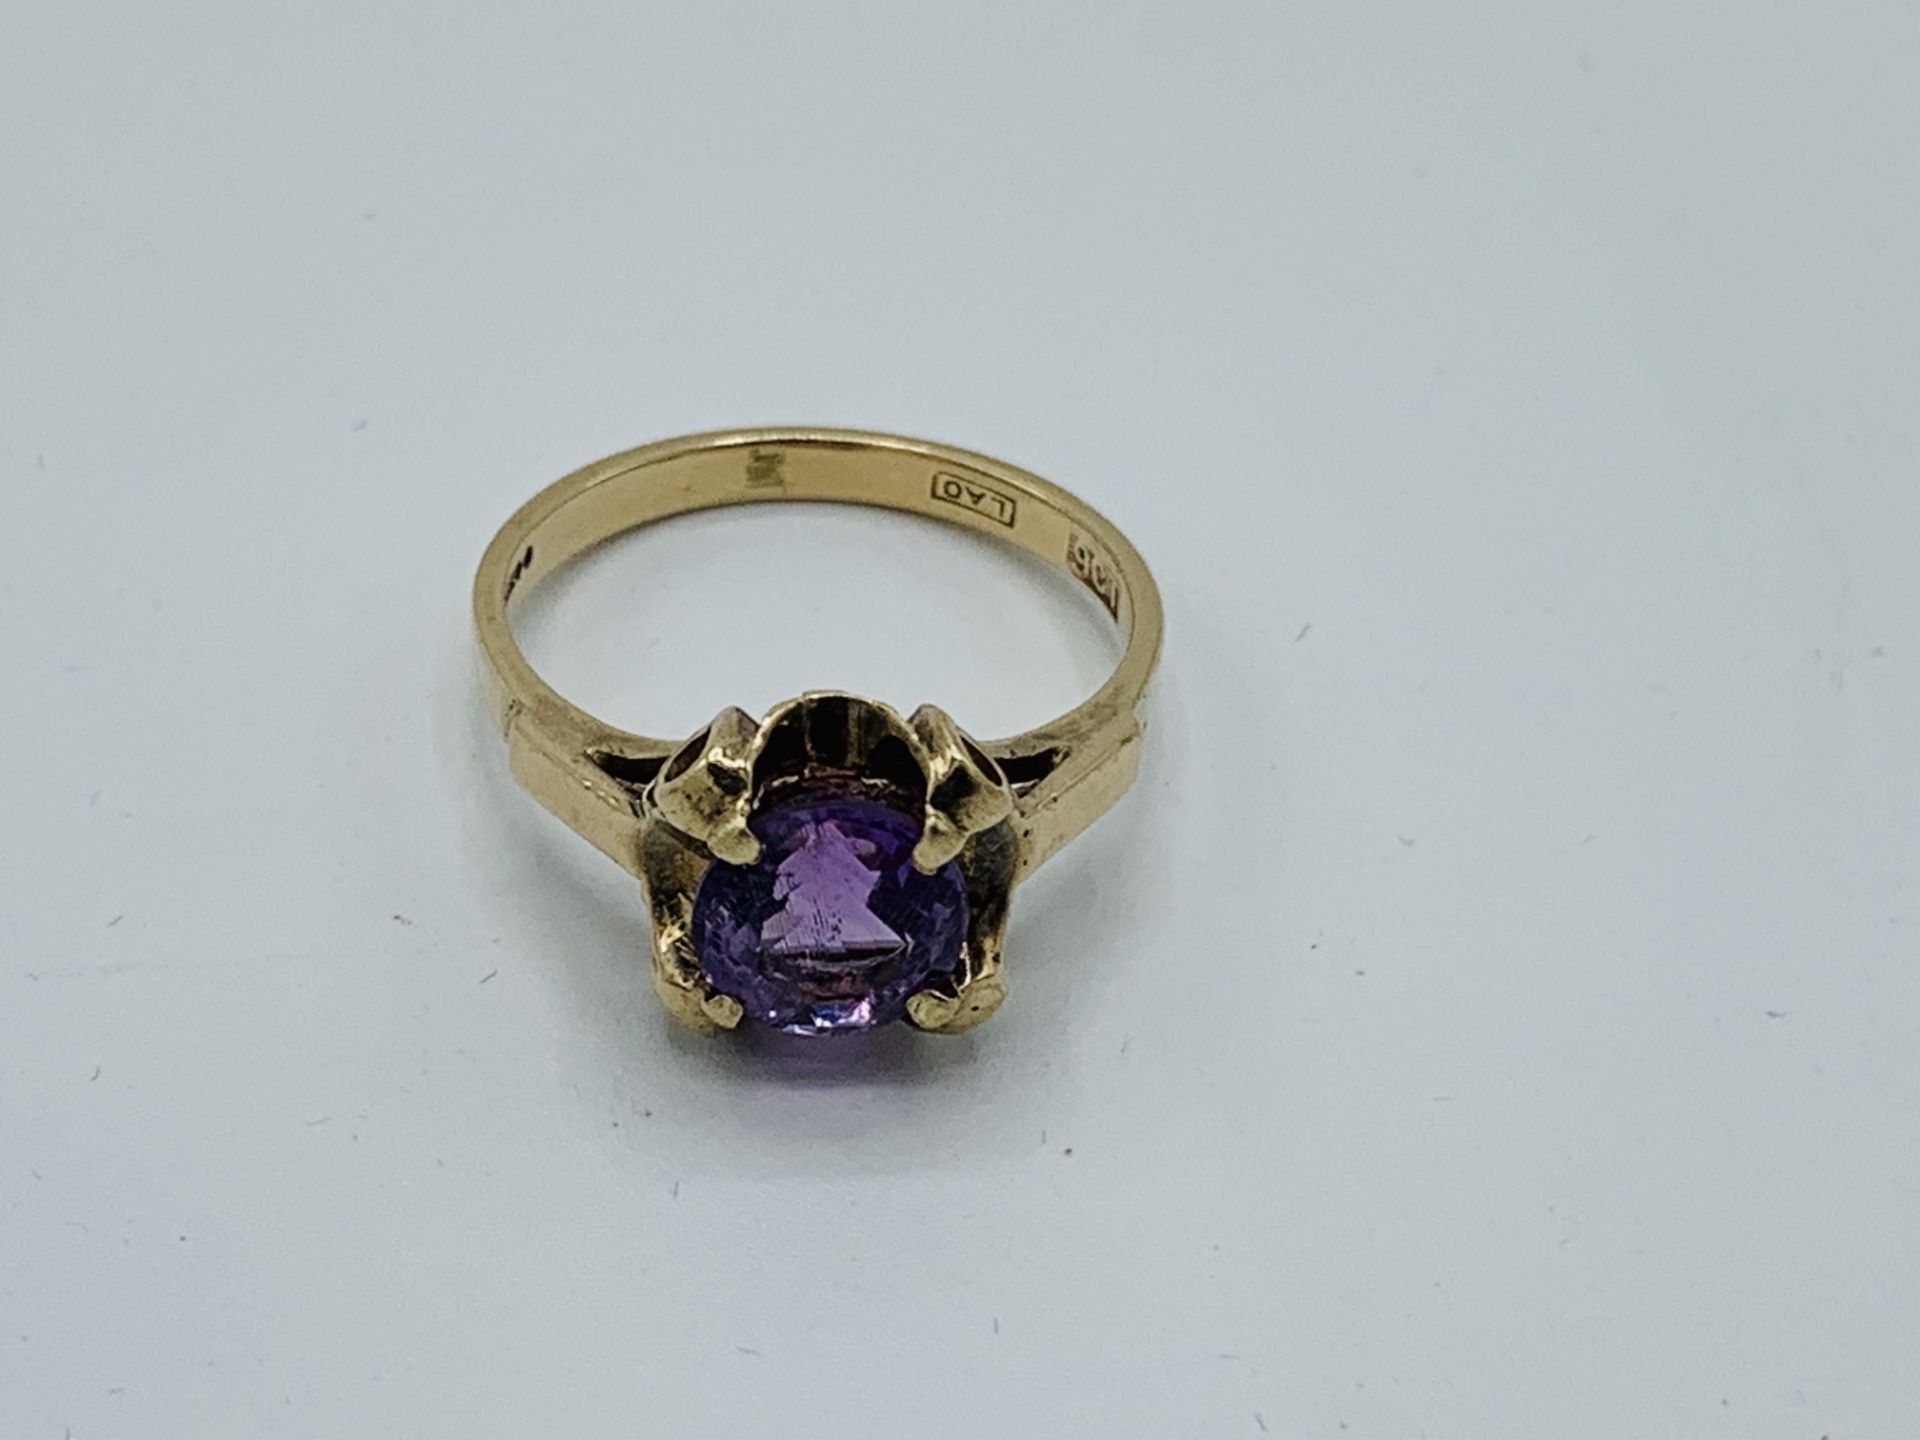 9ct gold amethyst ring, size N, weight 2.7gms. Estimate £80-100. - Image 3 of 3